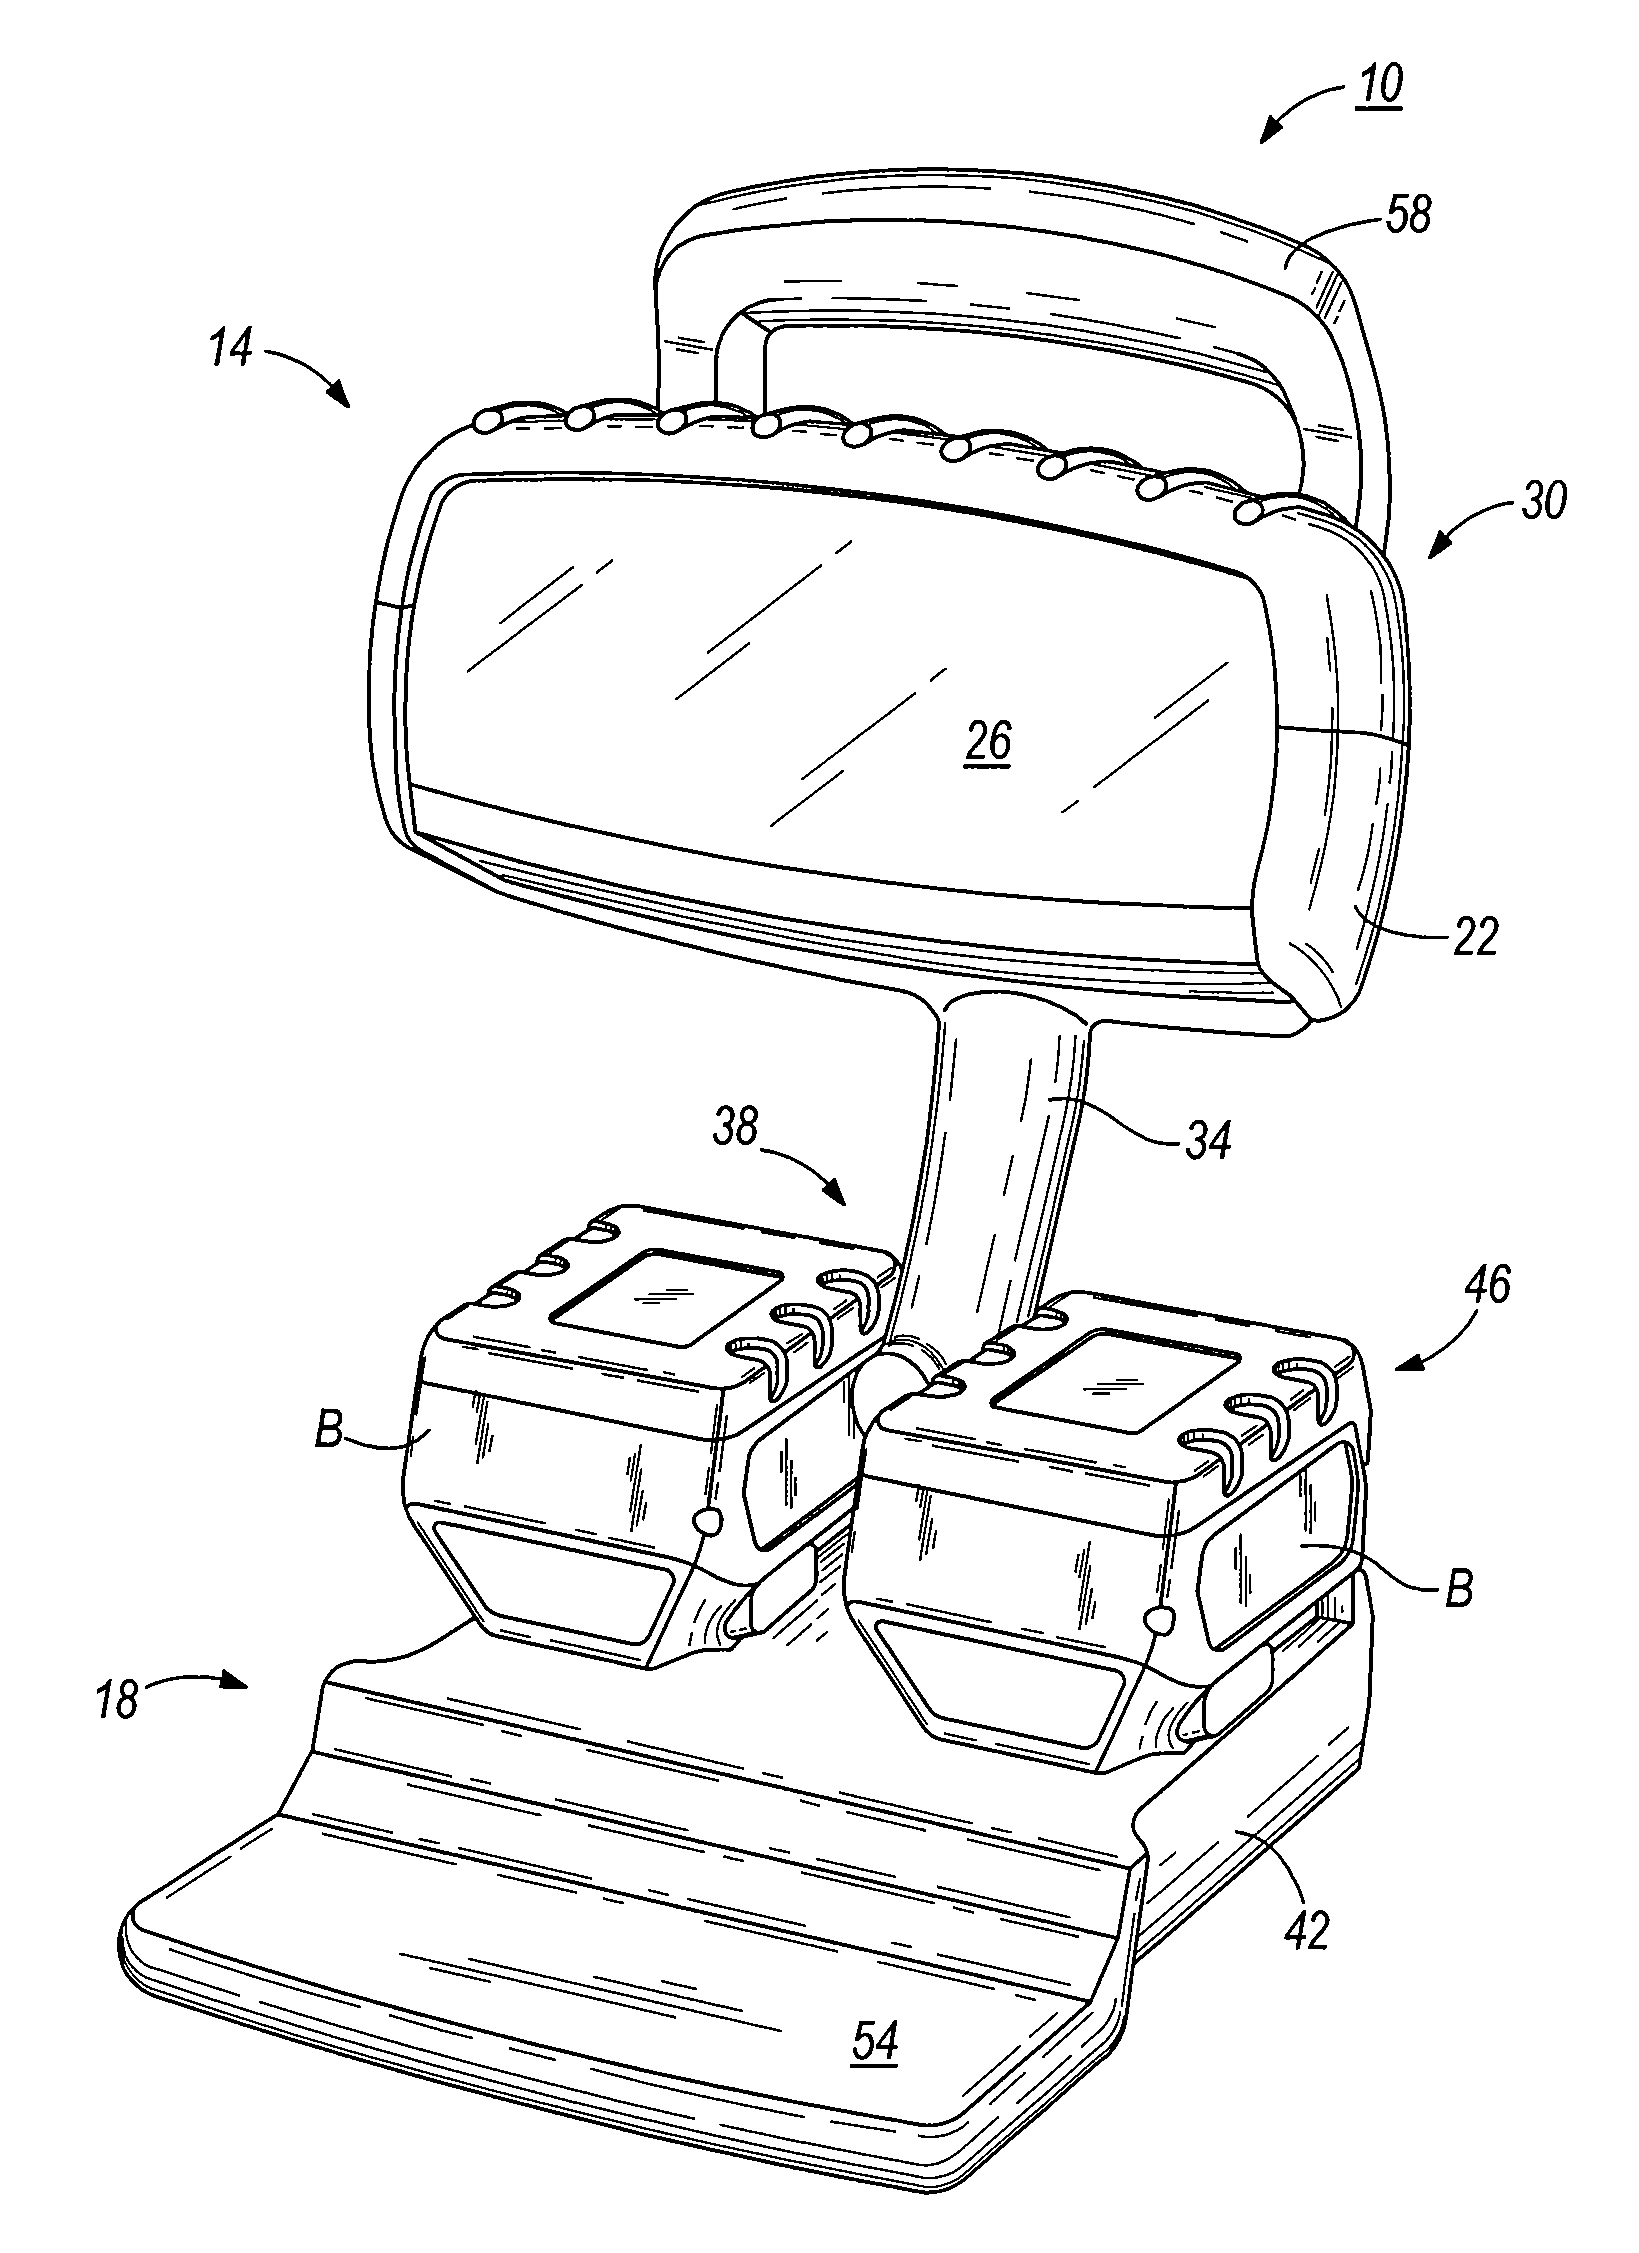 Electrical component, such as a lighting unit and battery charger assembly